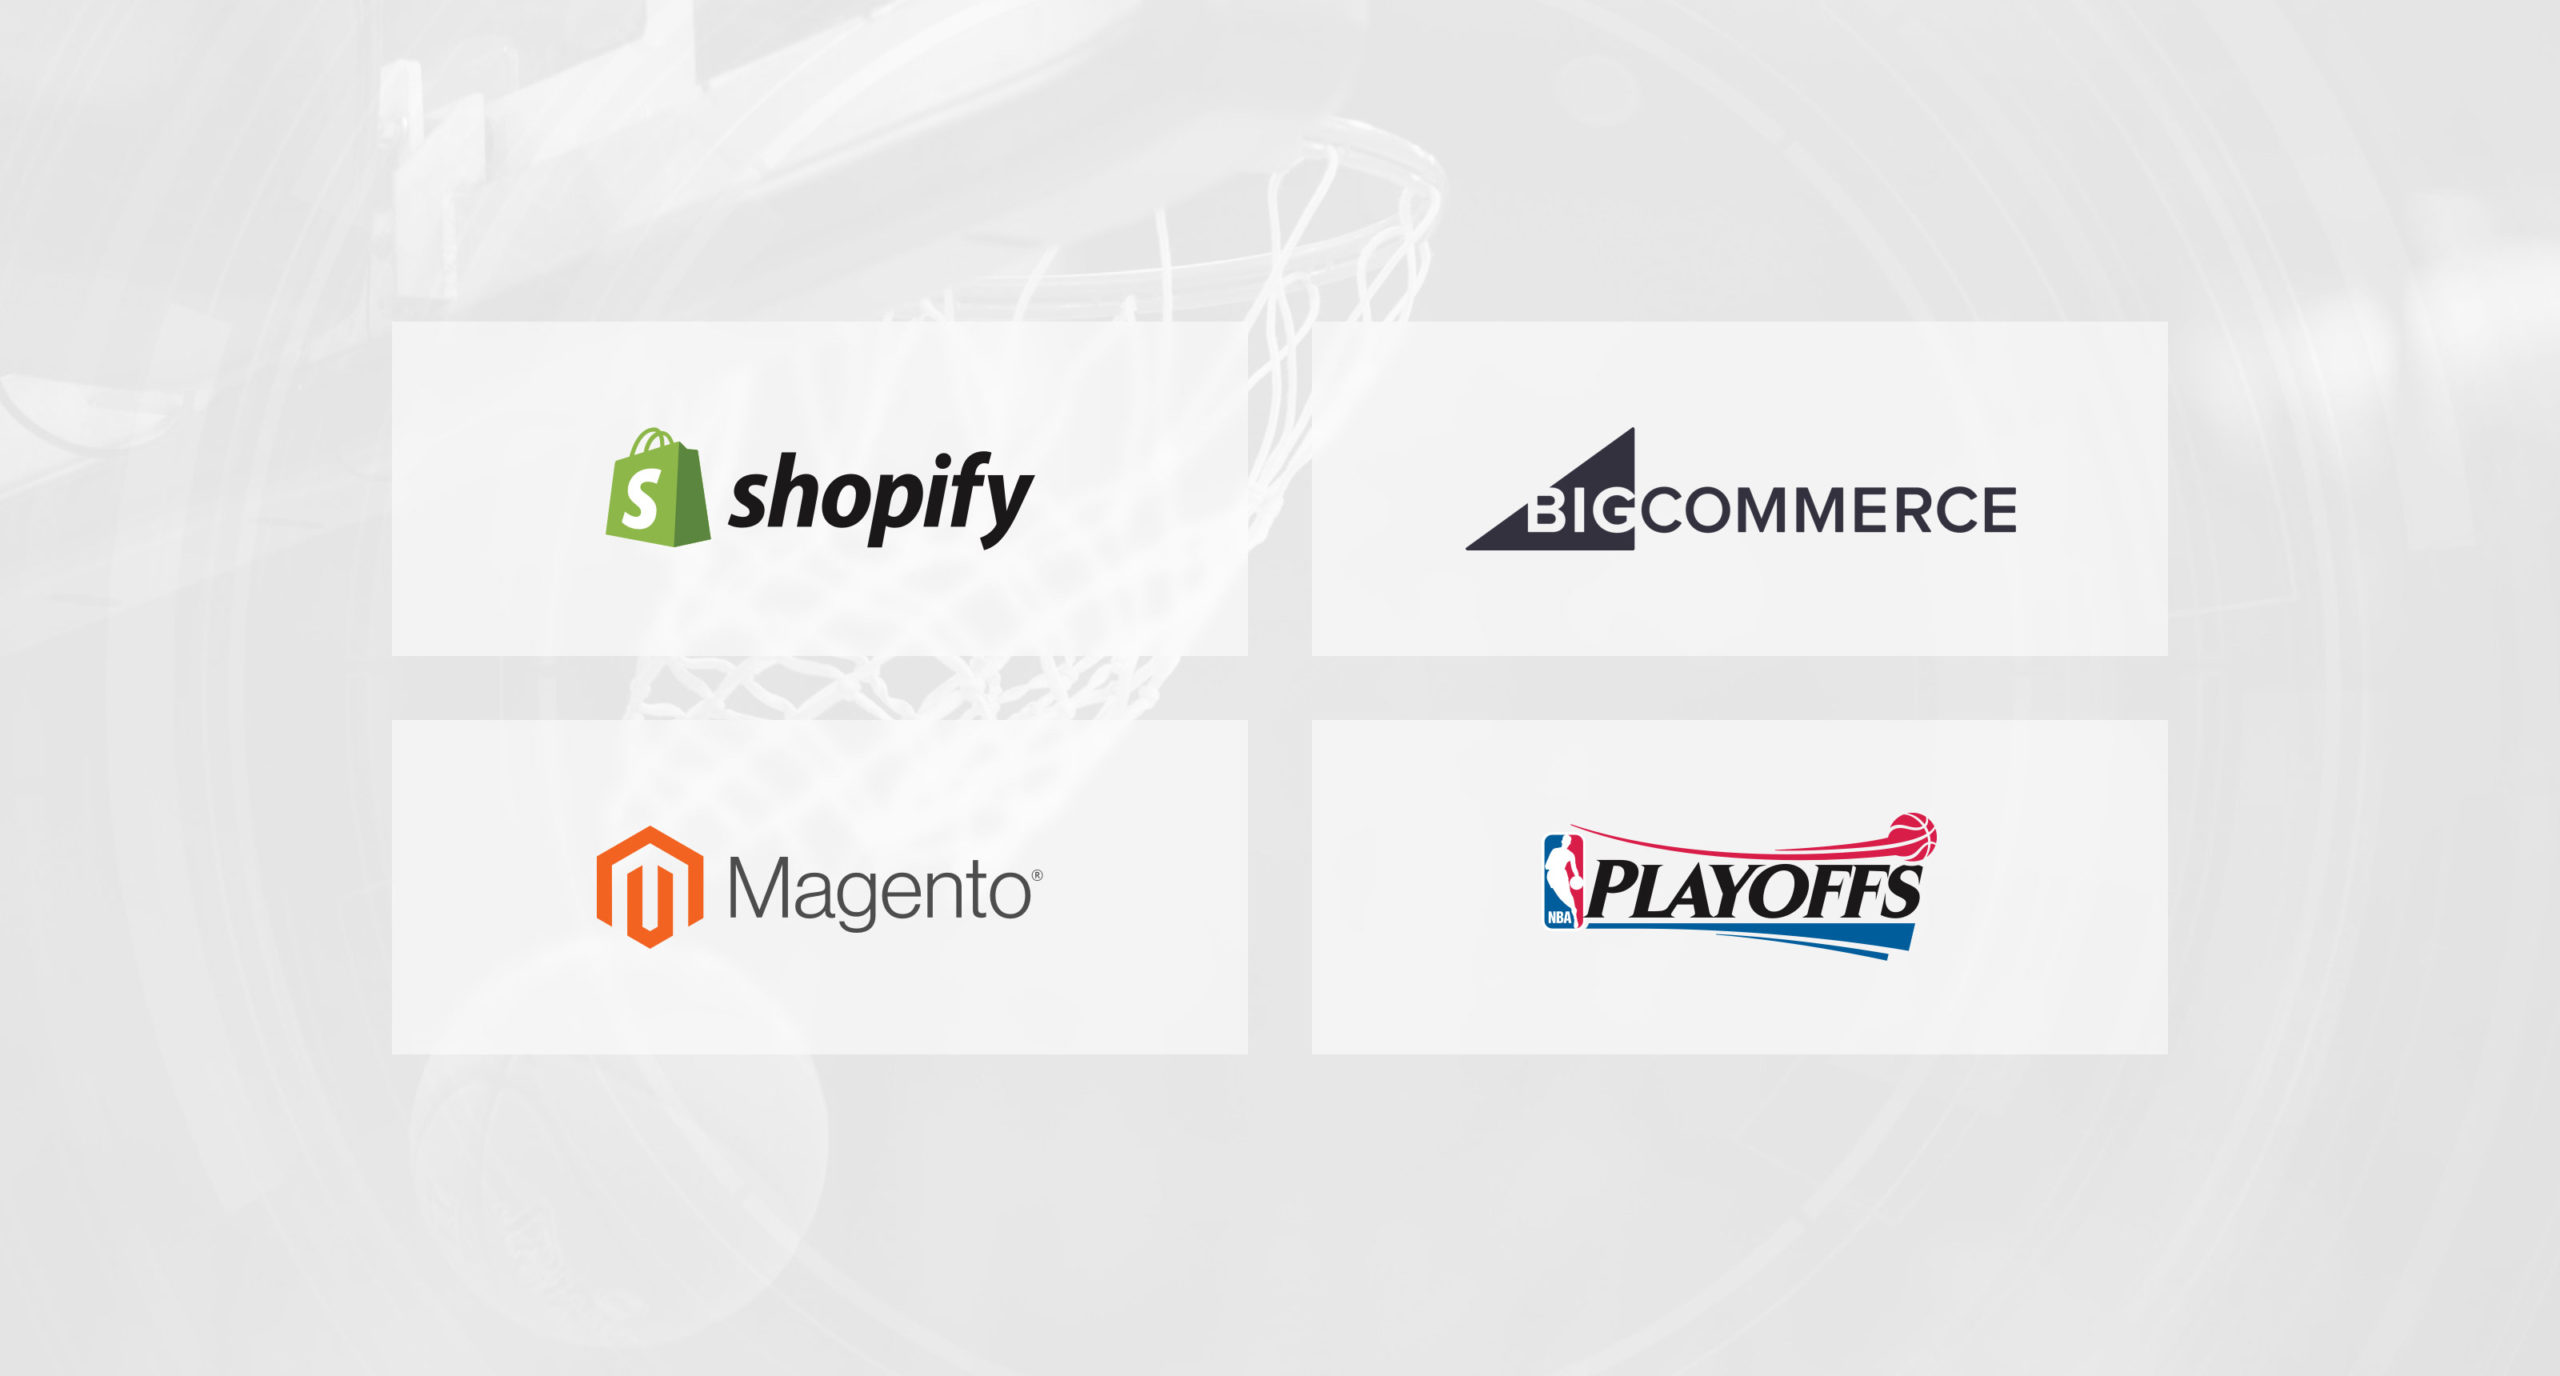 Shopify, Bigcommerce, Magento and the NBA Playoffs